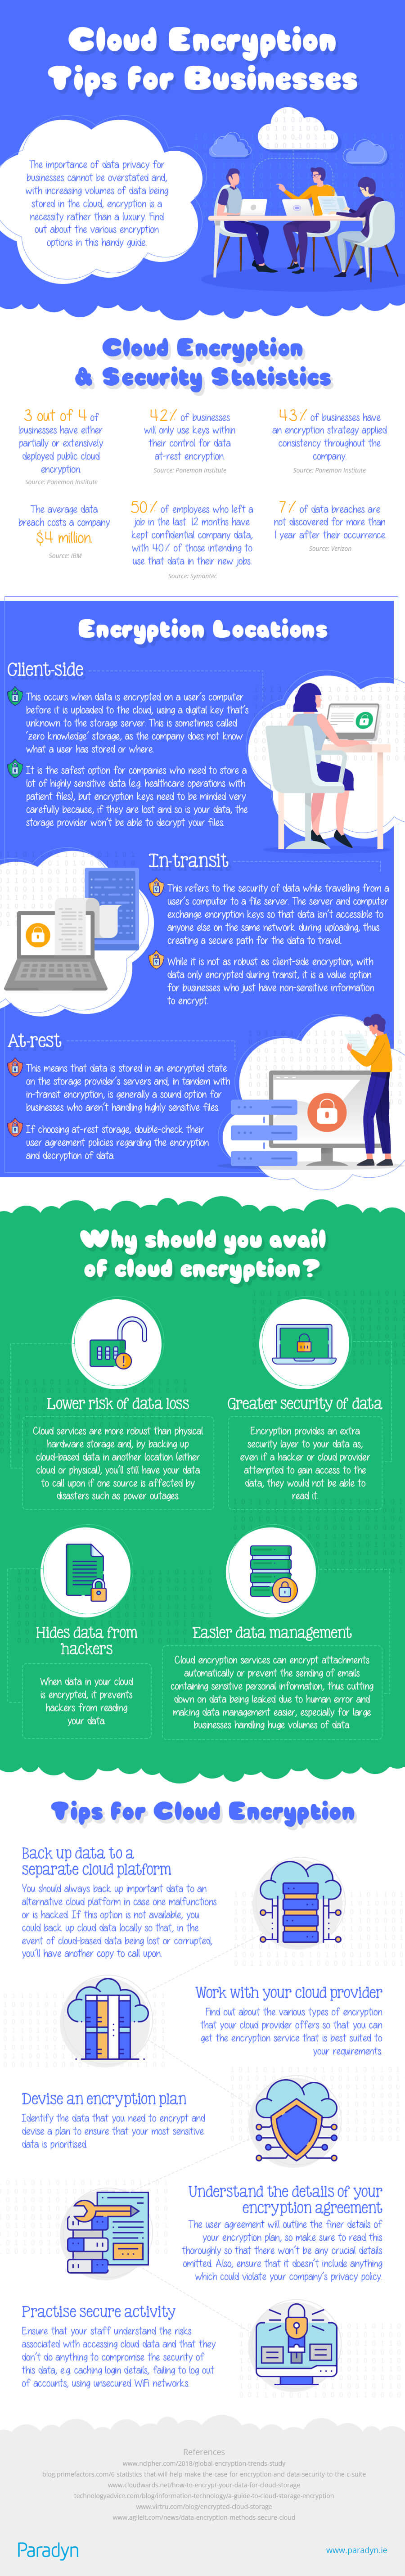 Cloud Encryption Tips for Businesses